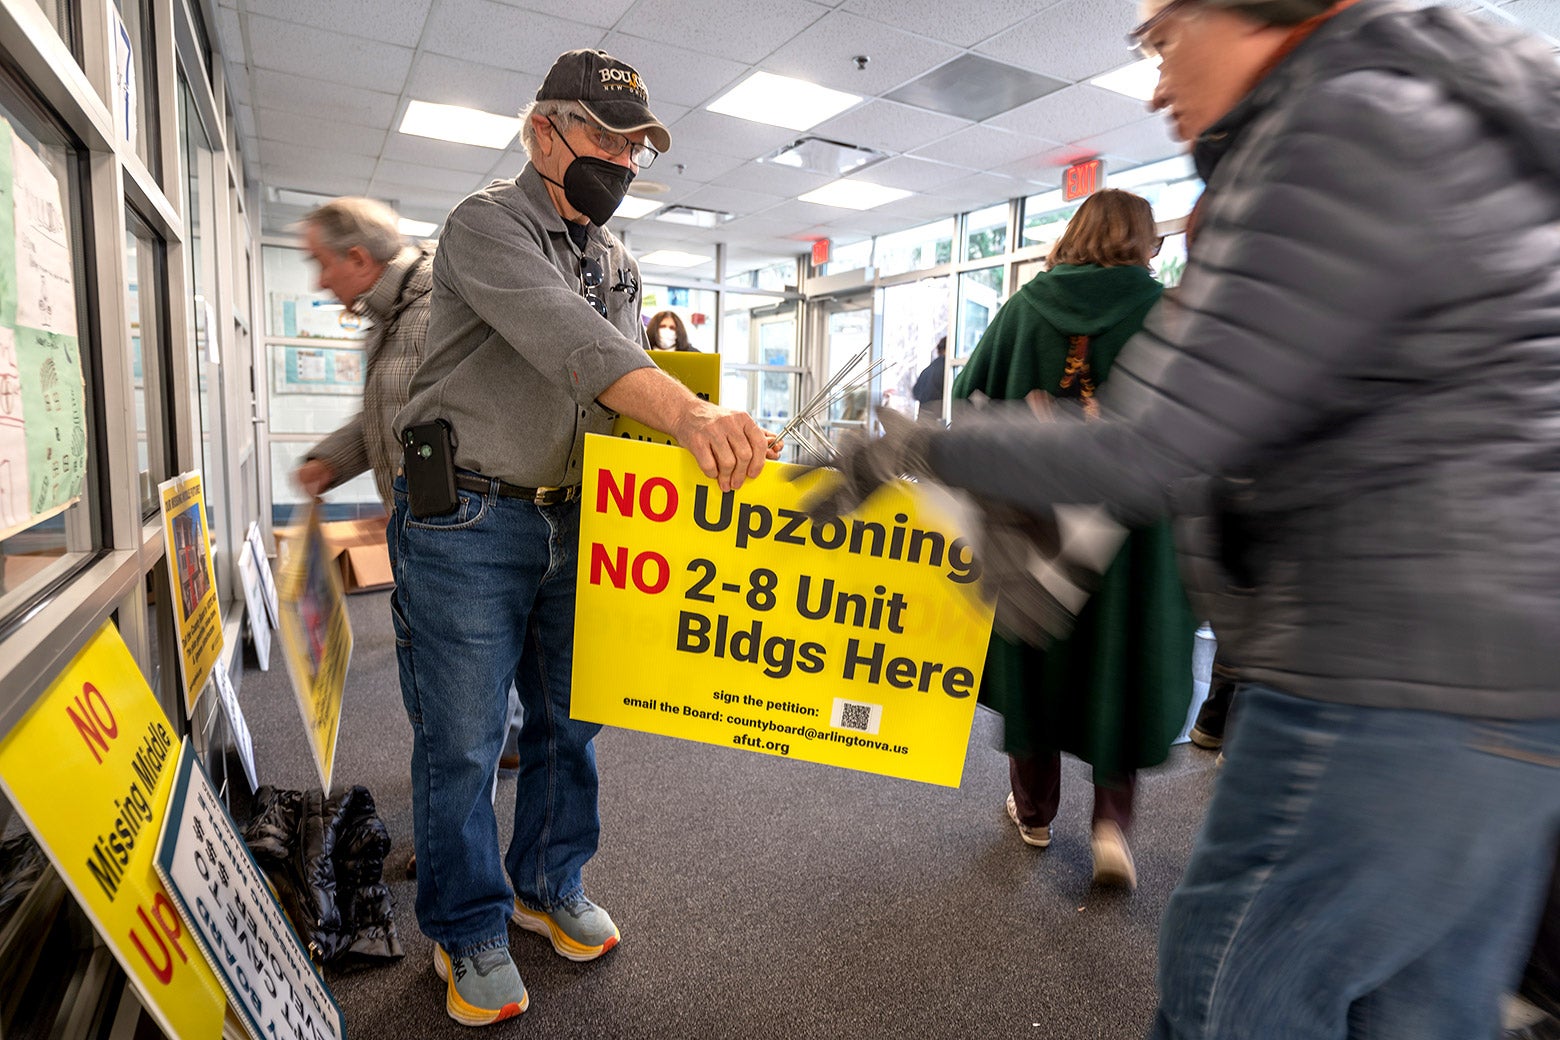 An older man in a cap hands out signs and holders to attendees of a meeting opposing a zoning deregulation proposal.